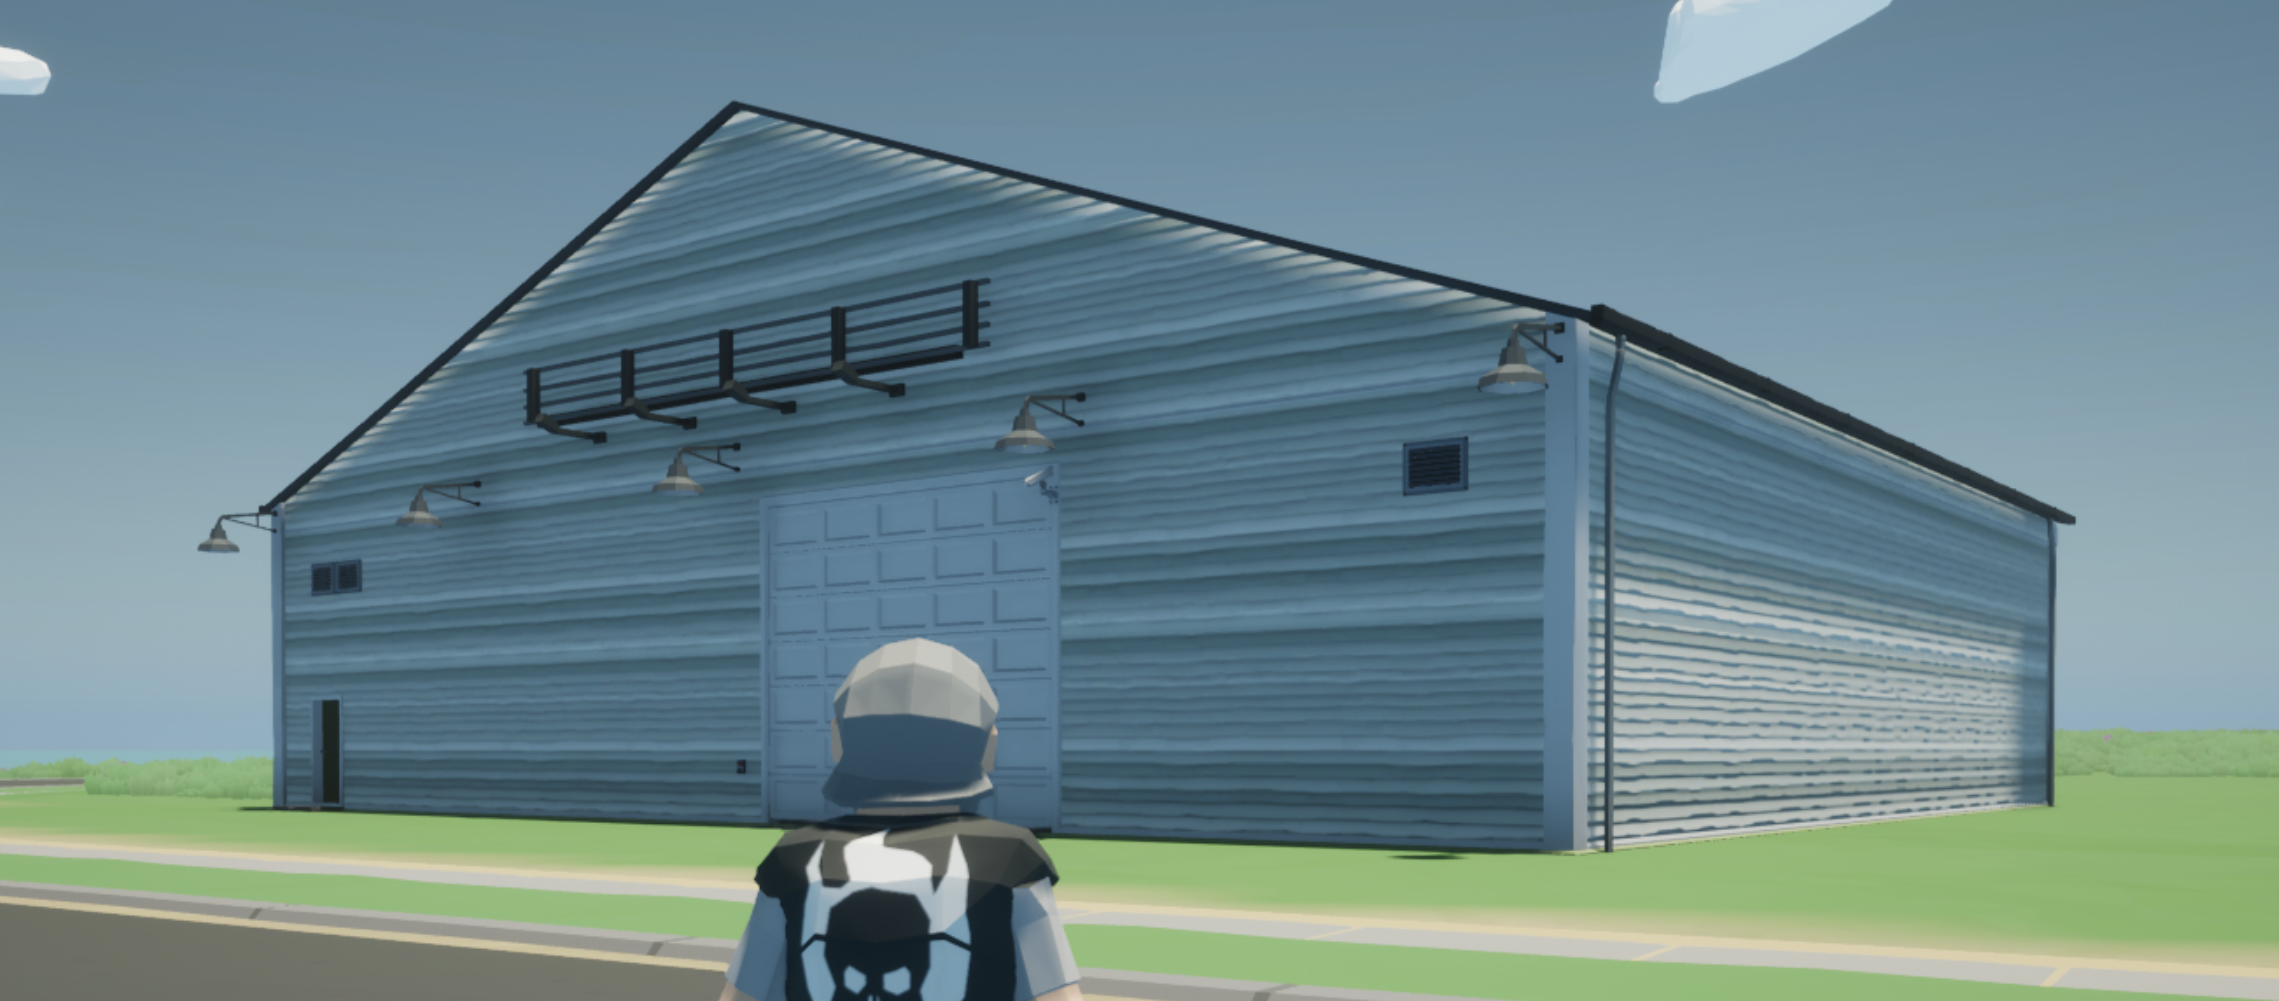 Motors Would Like To Build A Garage For You